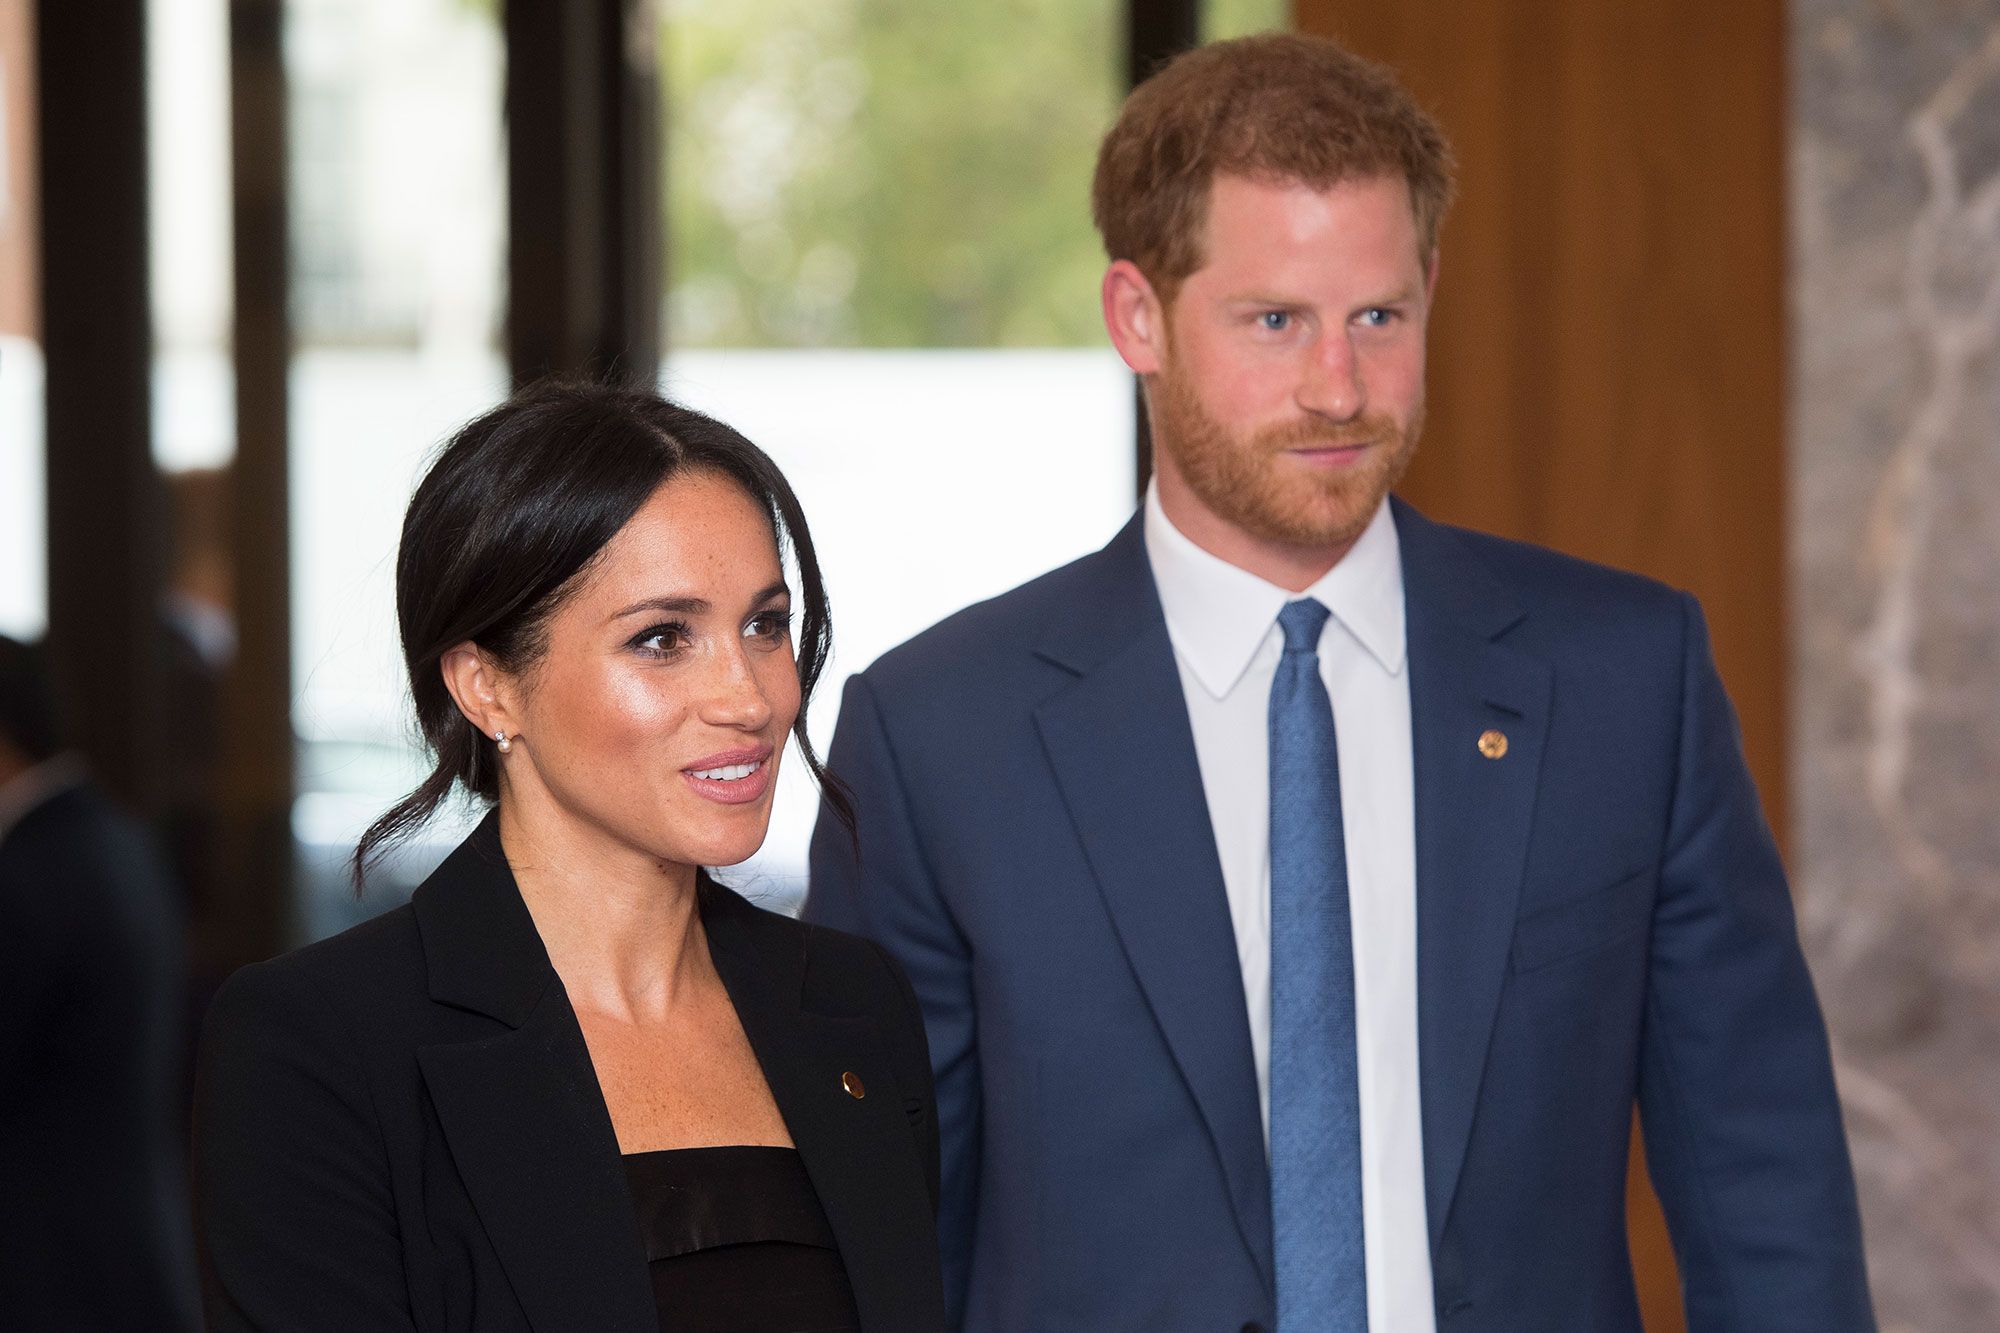 Prince Harry And Meghan Markle Have Taken Another Formal Step Away From Sussex Royal